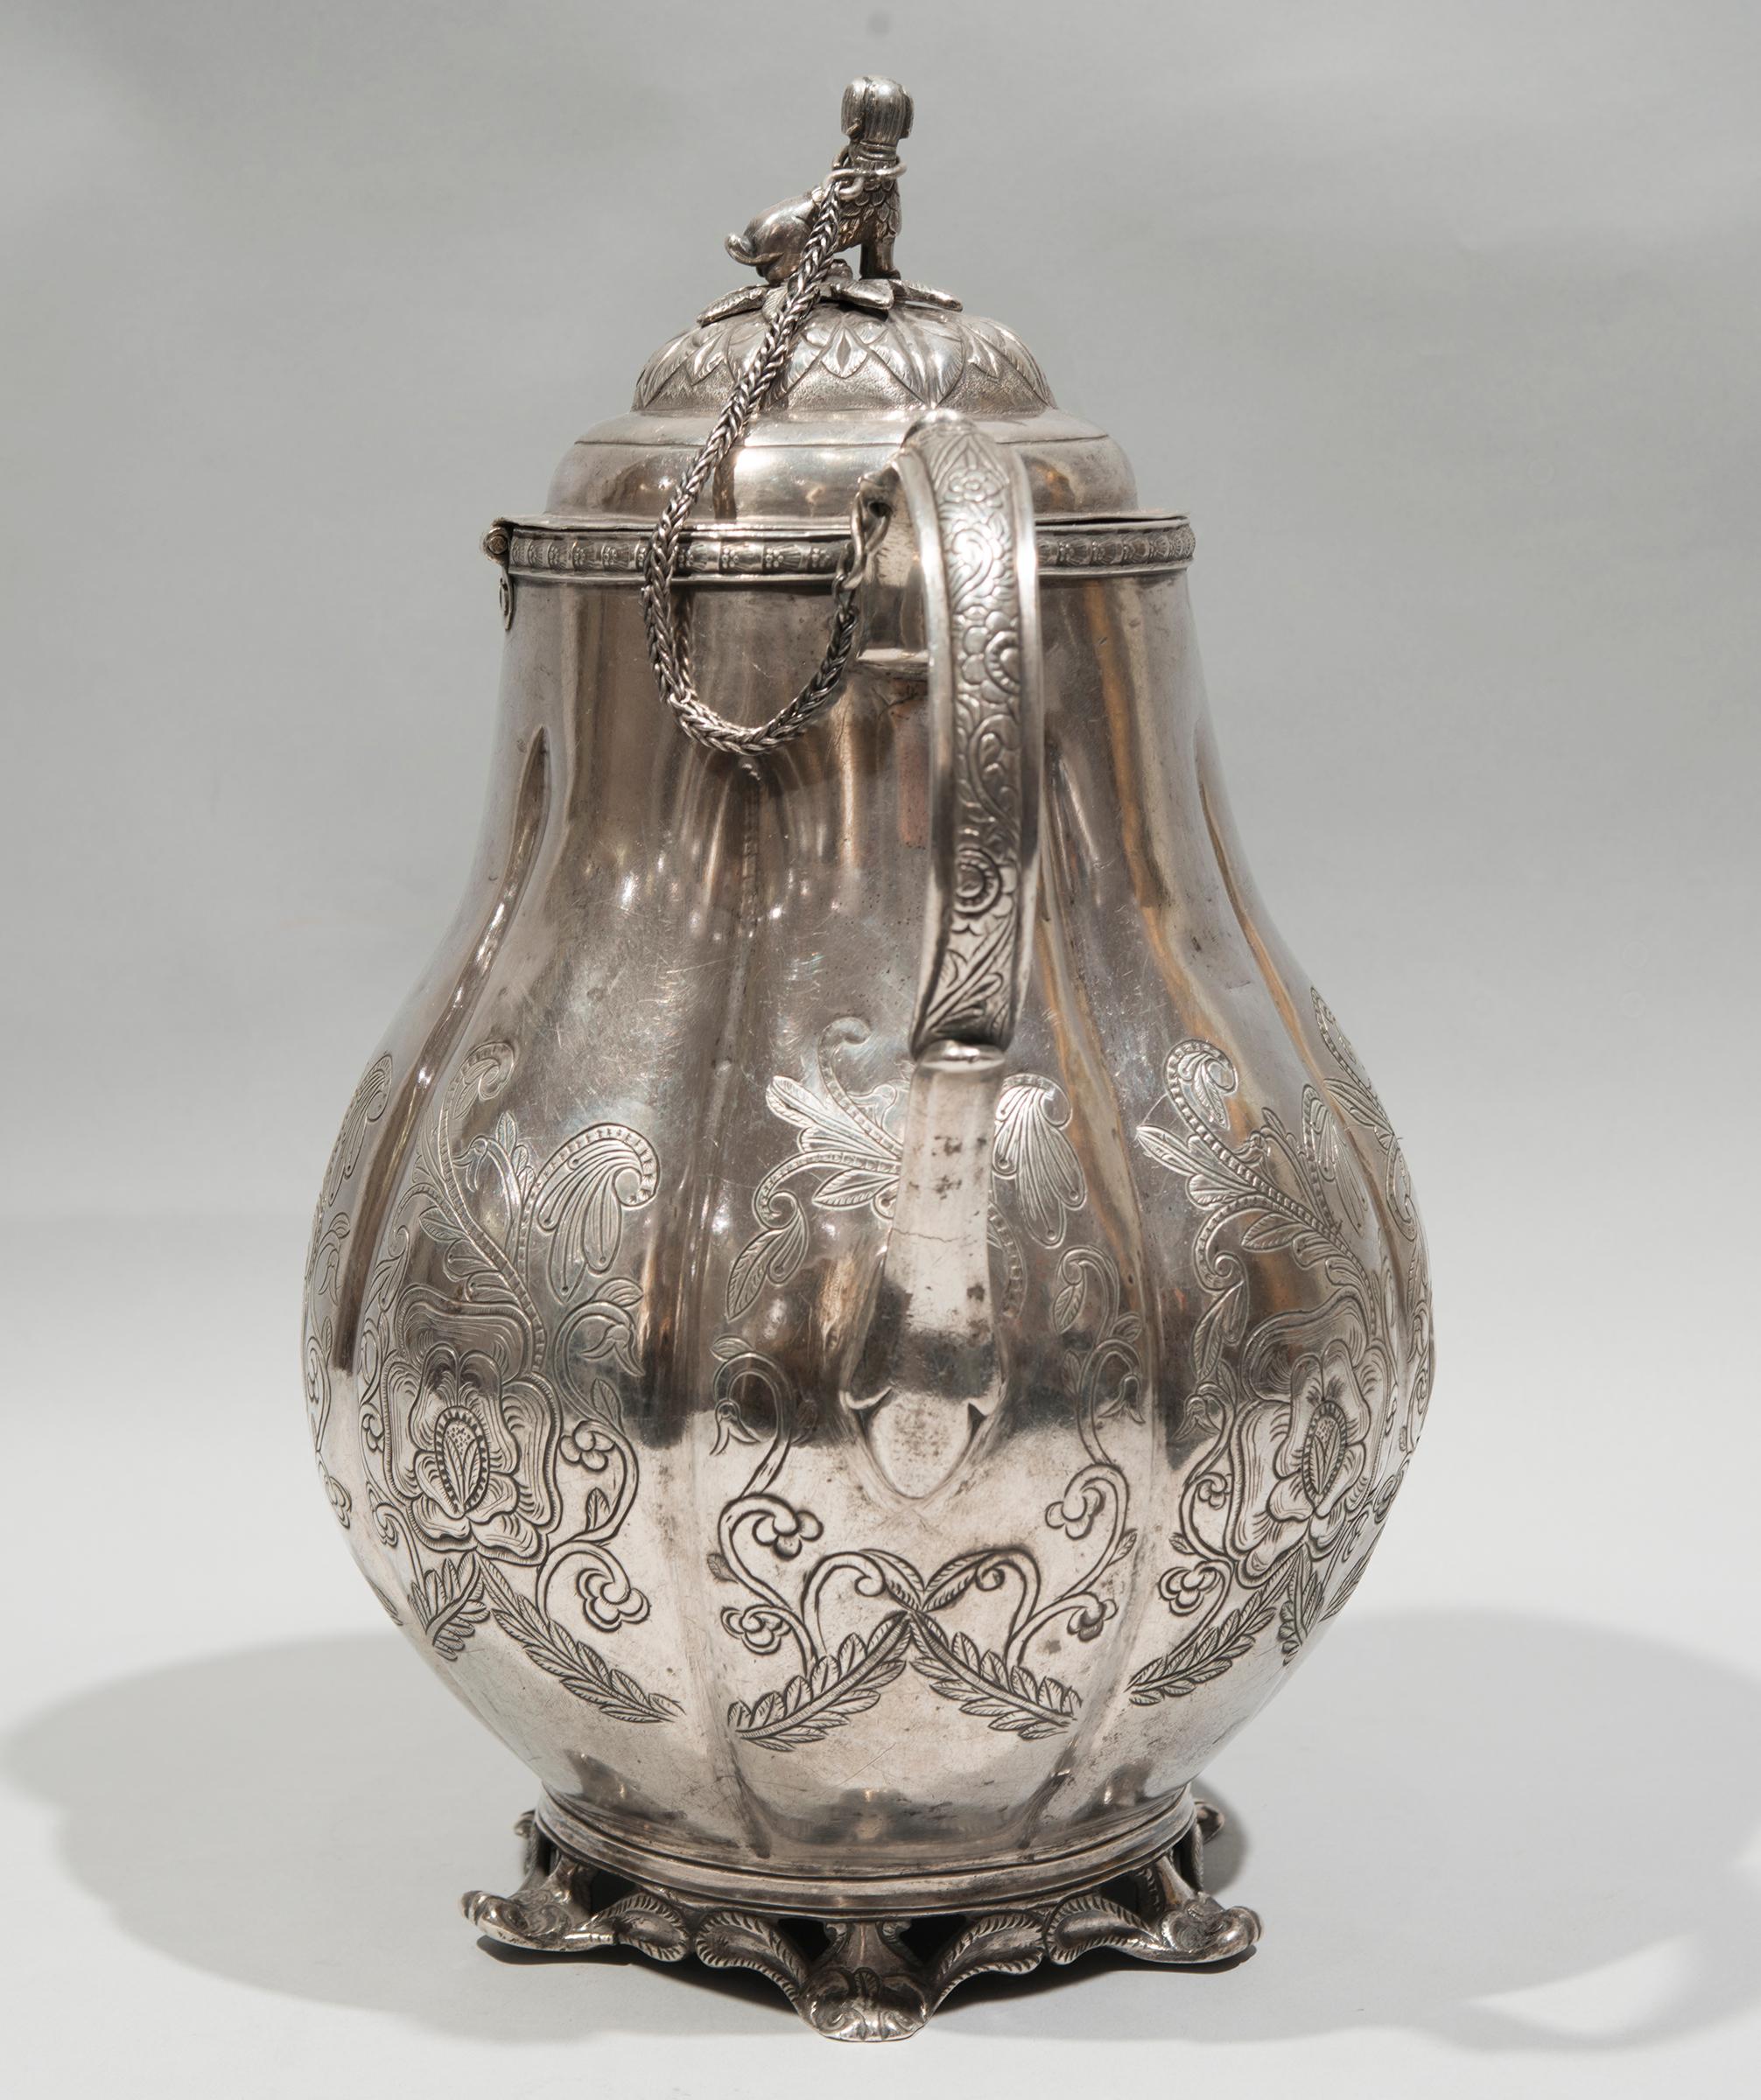 Bolivian 19th Century Pear-Shaped Silver Cafetera